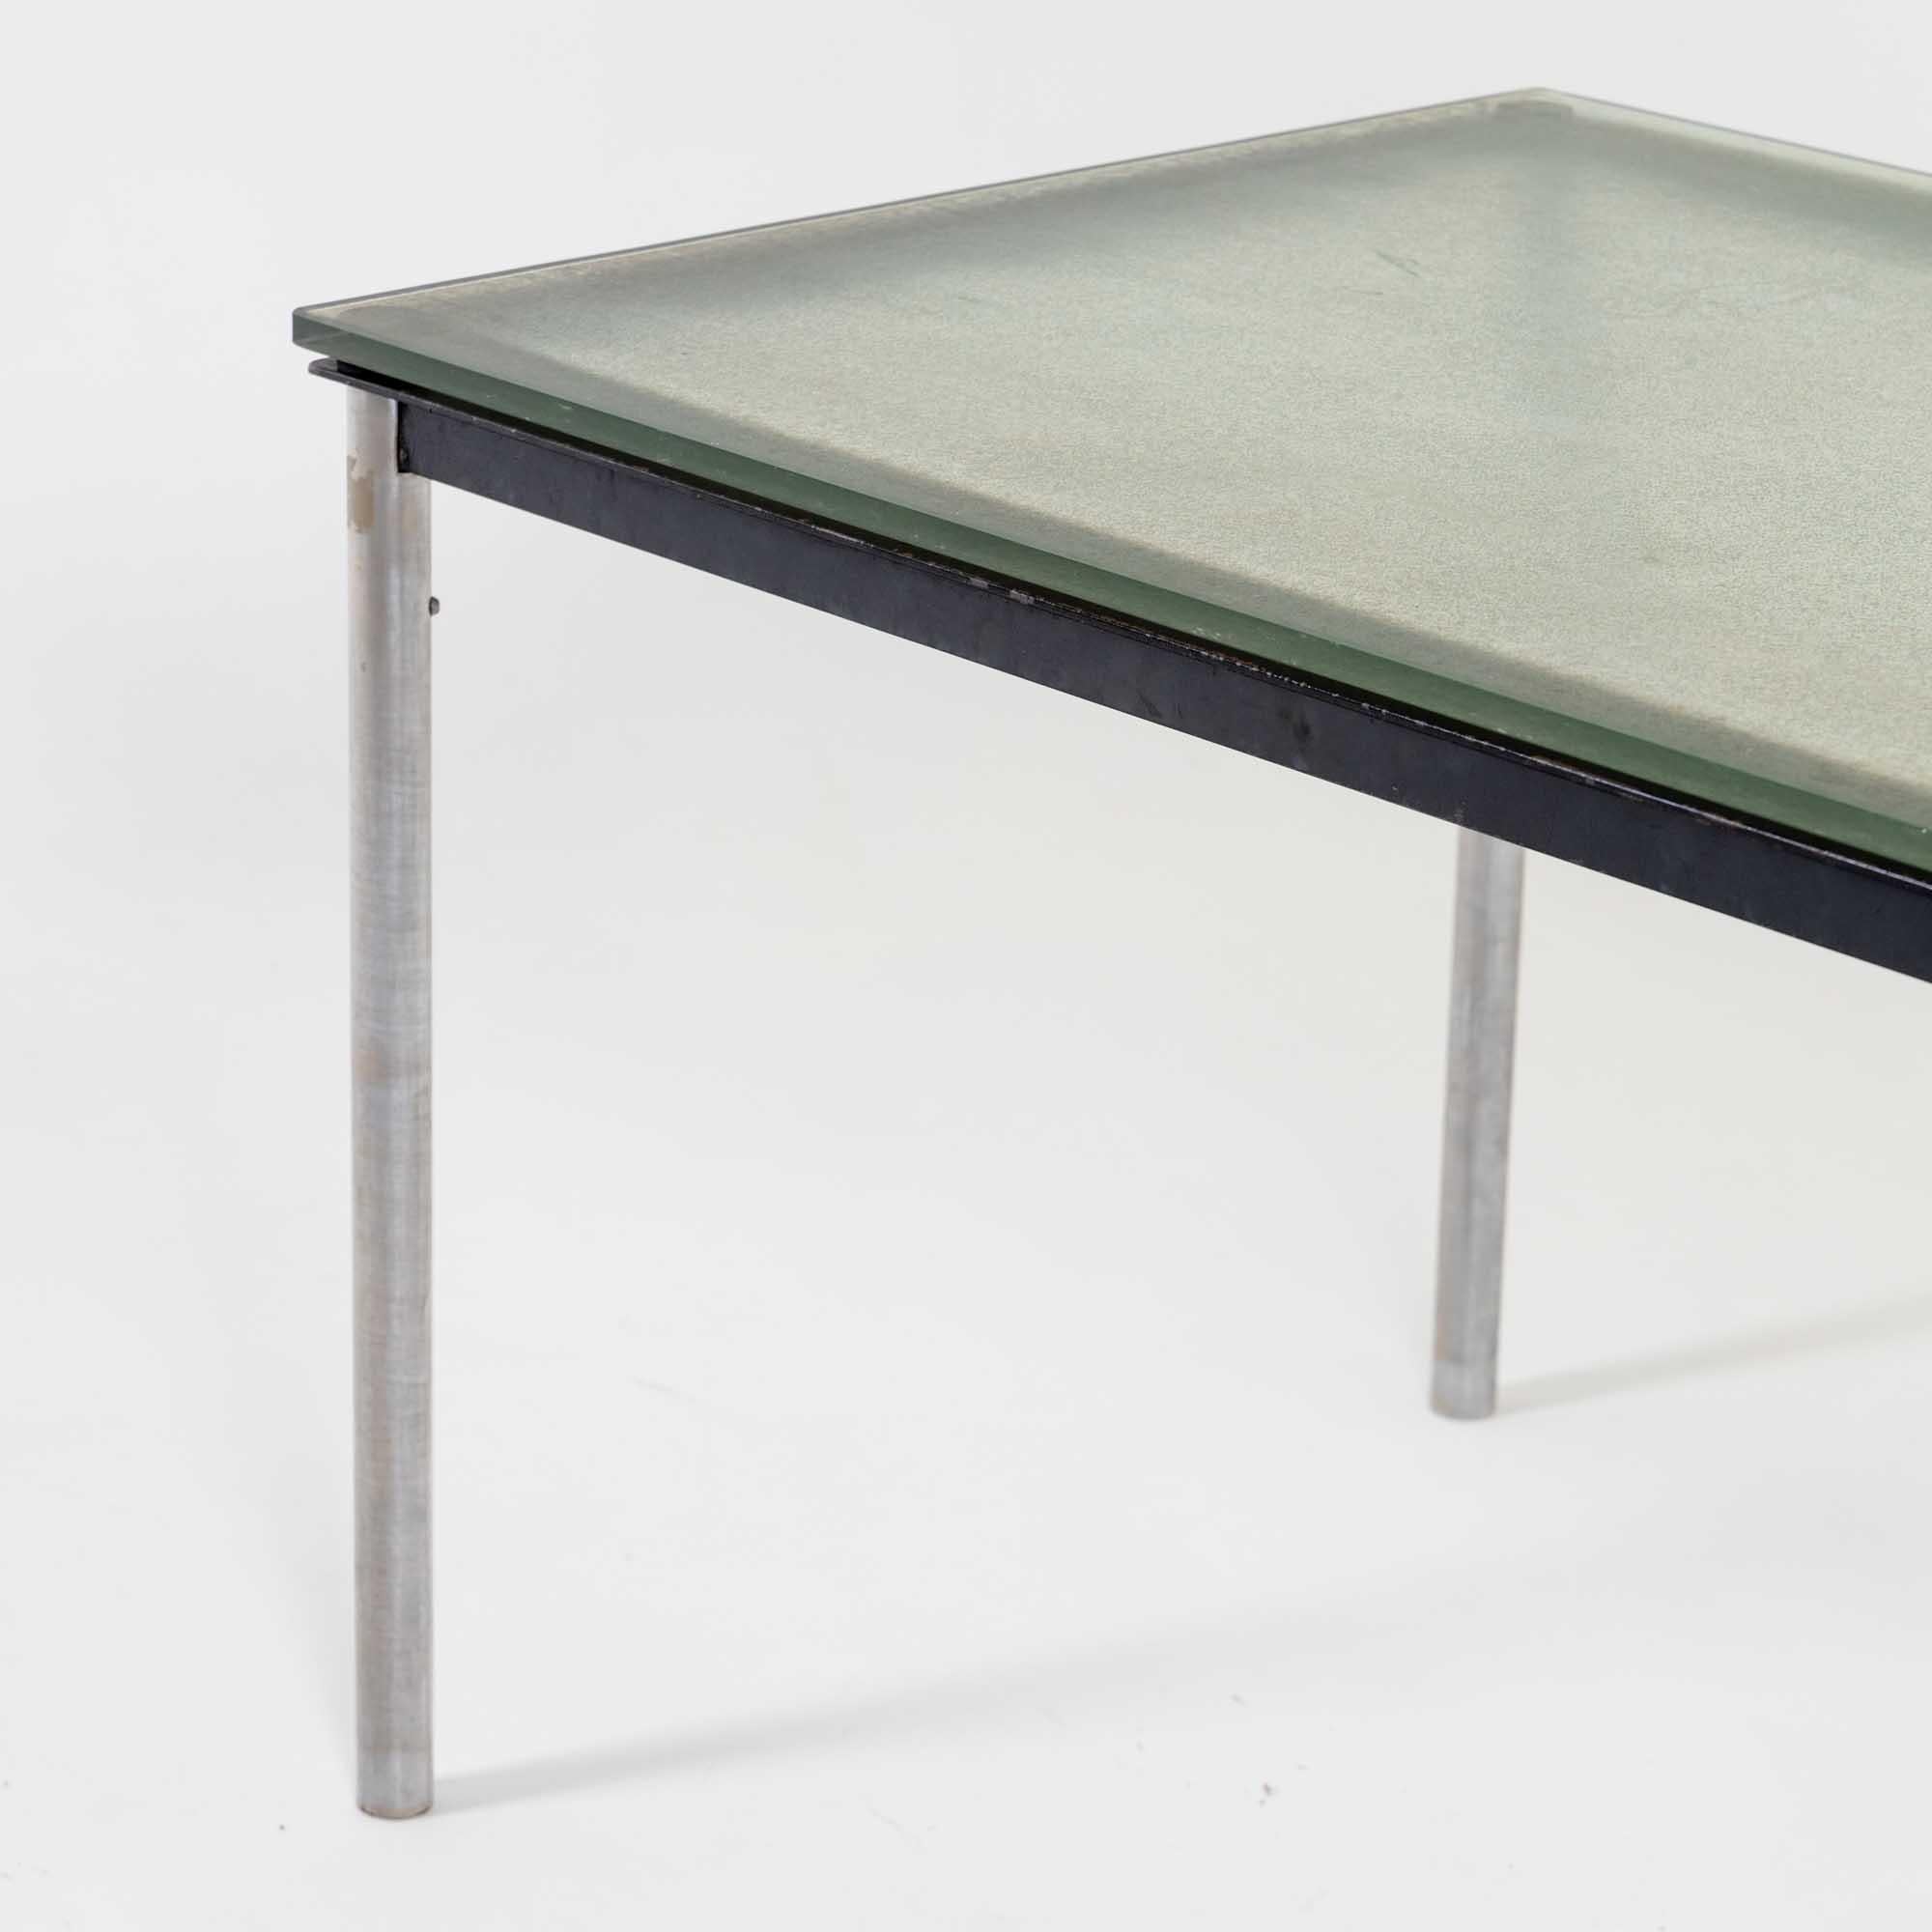 Modern LC10 Table by Le Corbusier for Cassina, Chromed-Legs & Glass Top, Late 20th C. For Sale